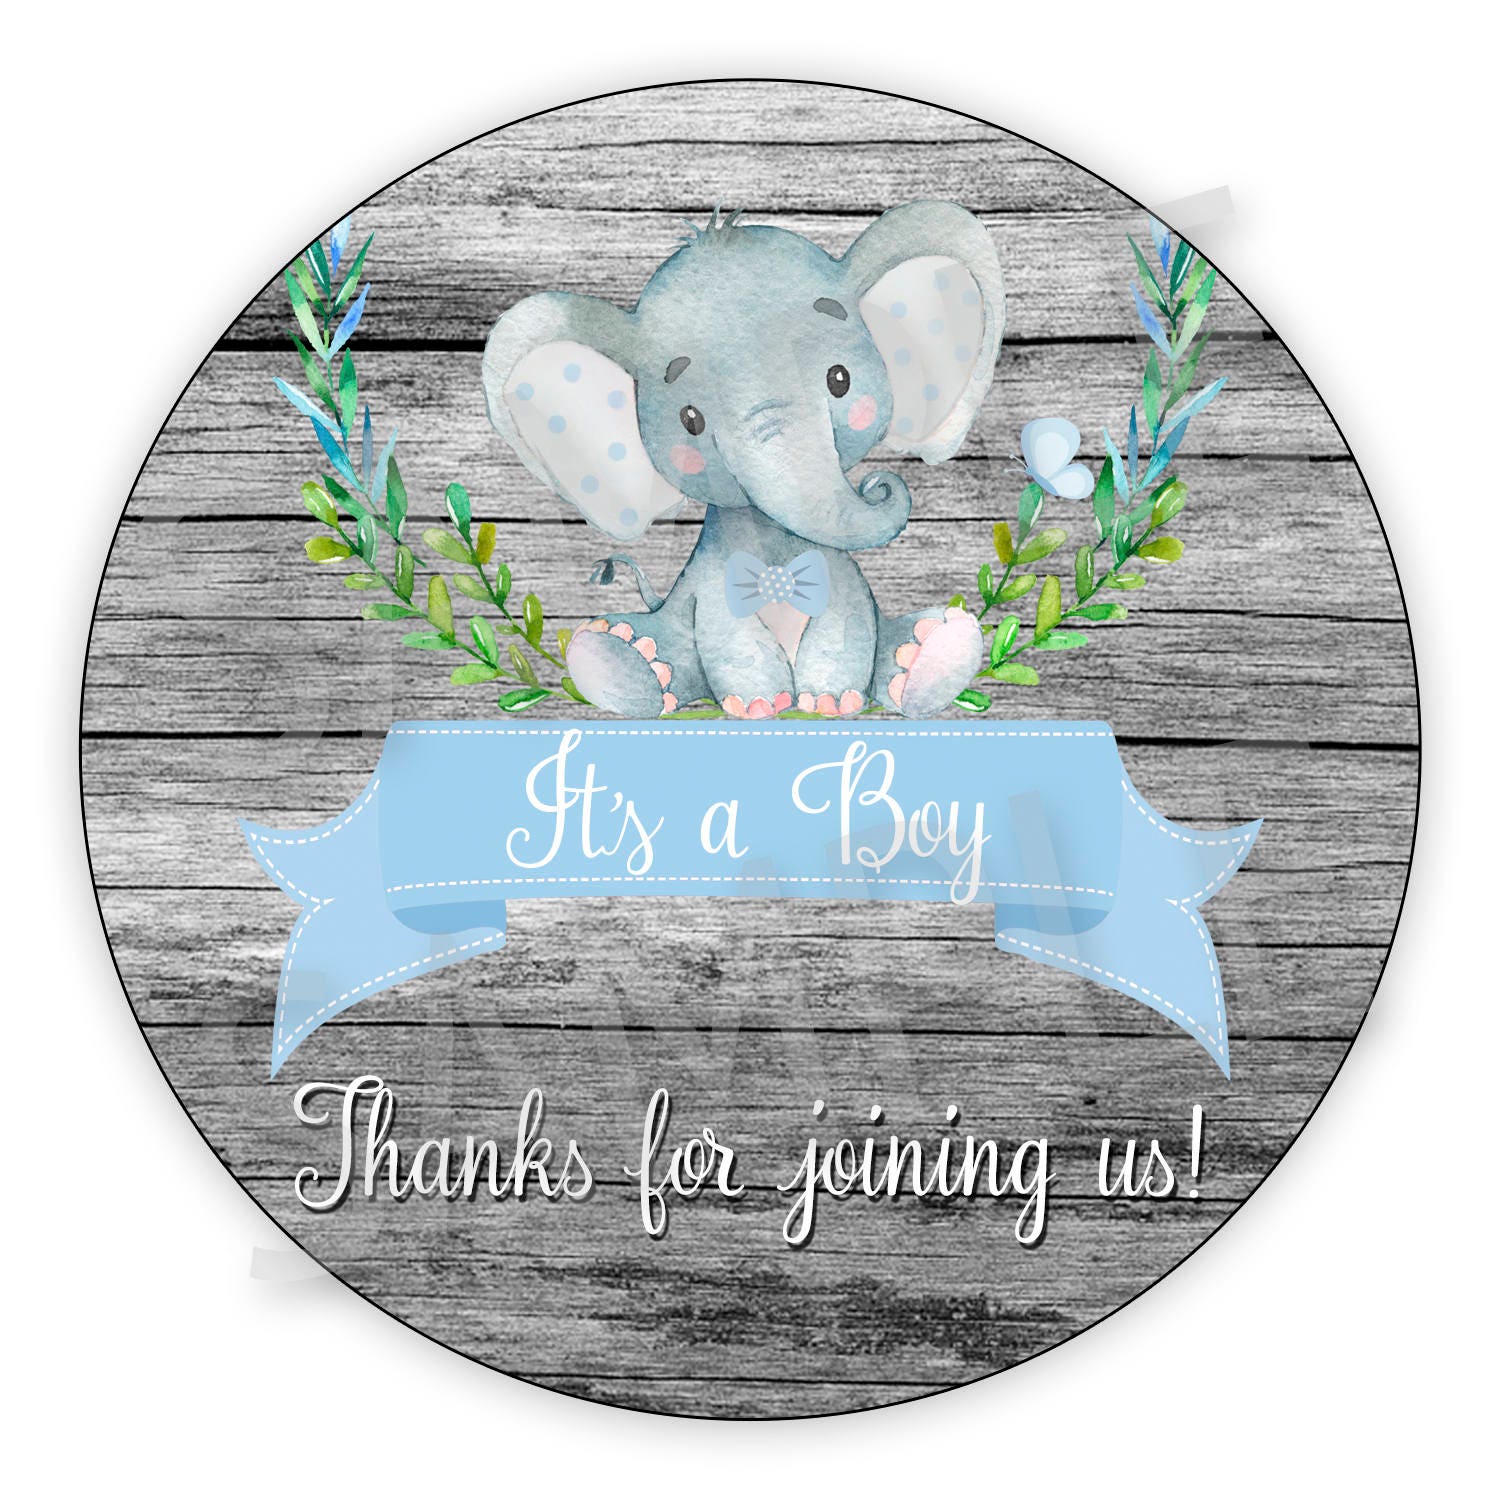 free-printable-elephant-baby-shower-tags-thank-you-tags-baby-shower